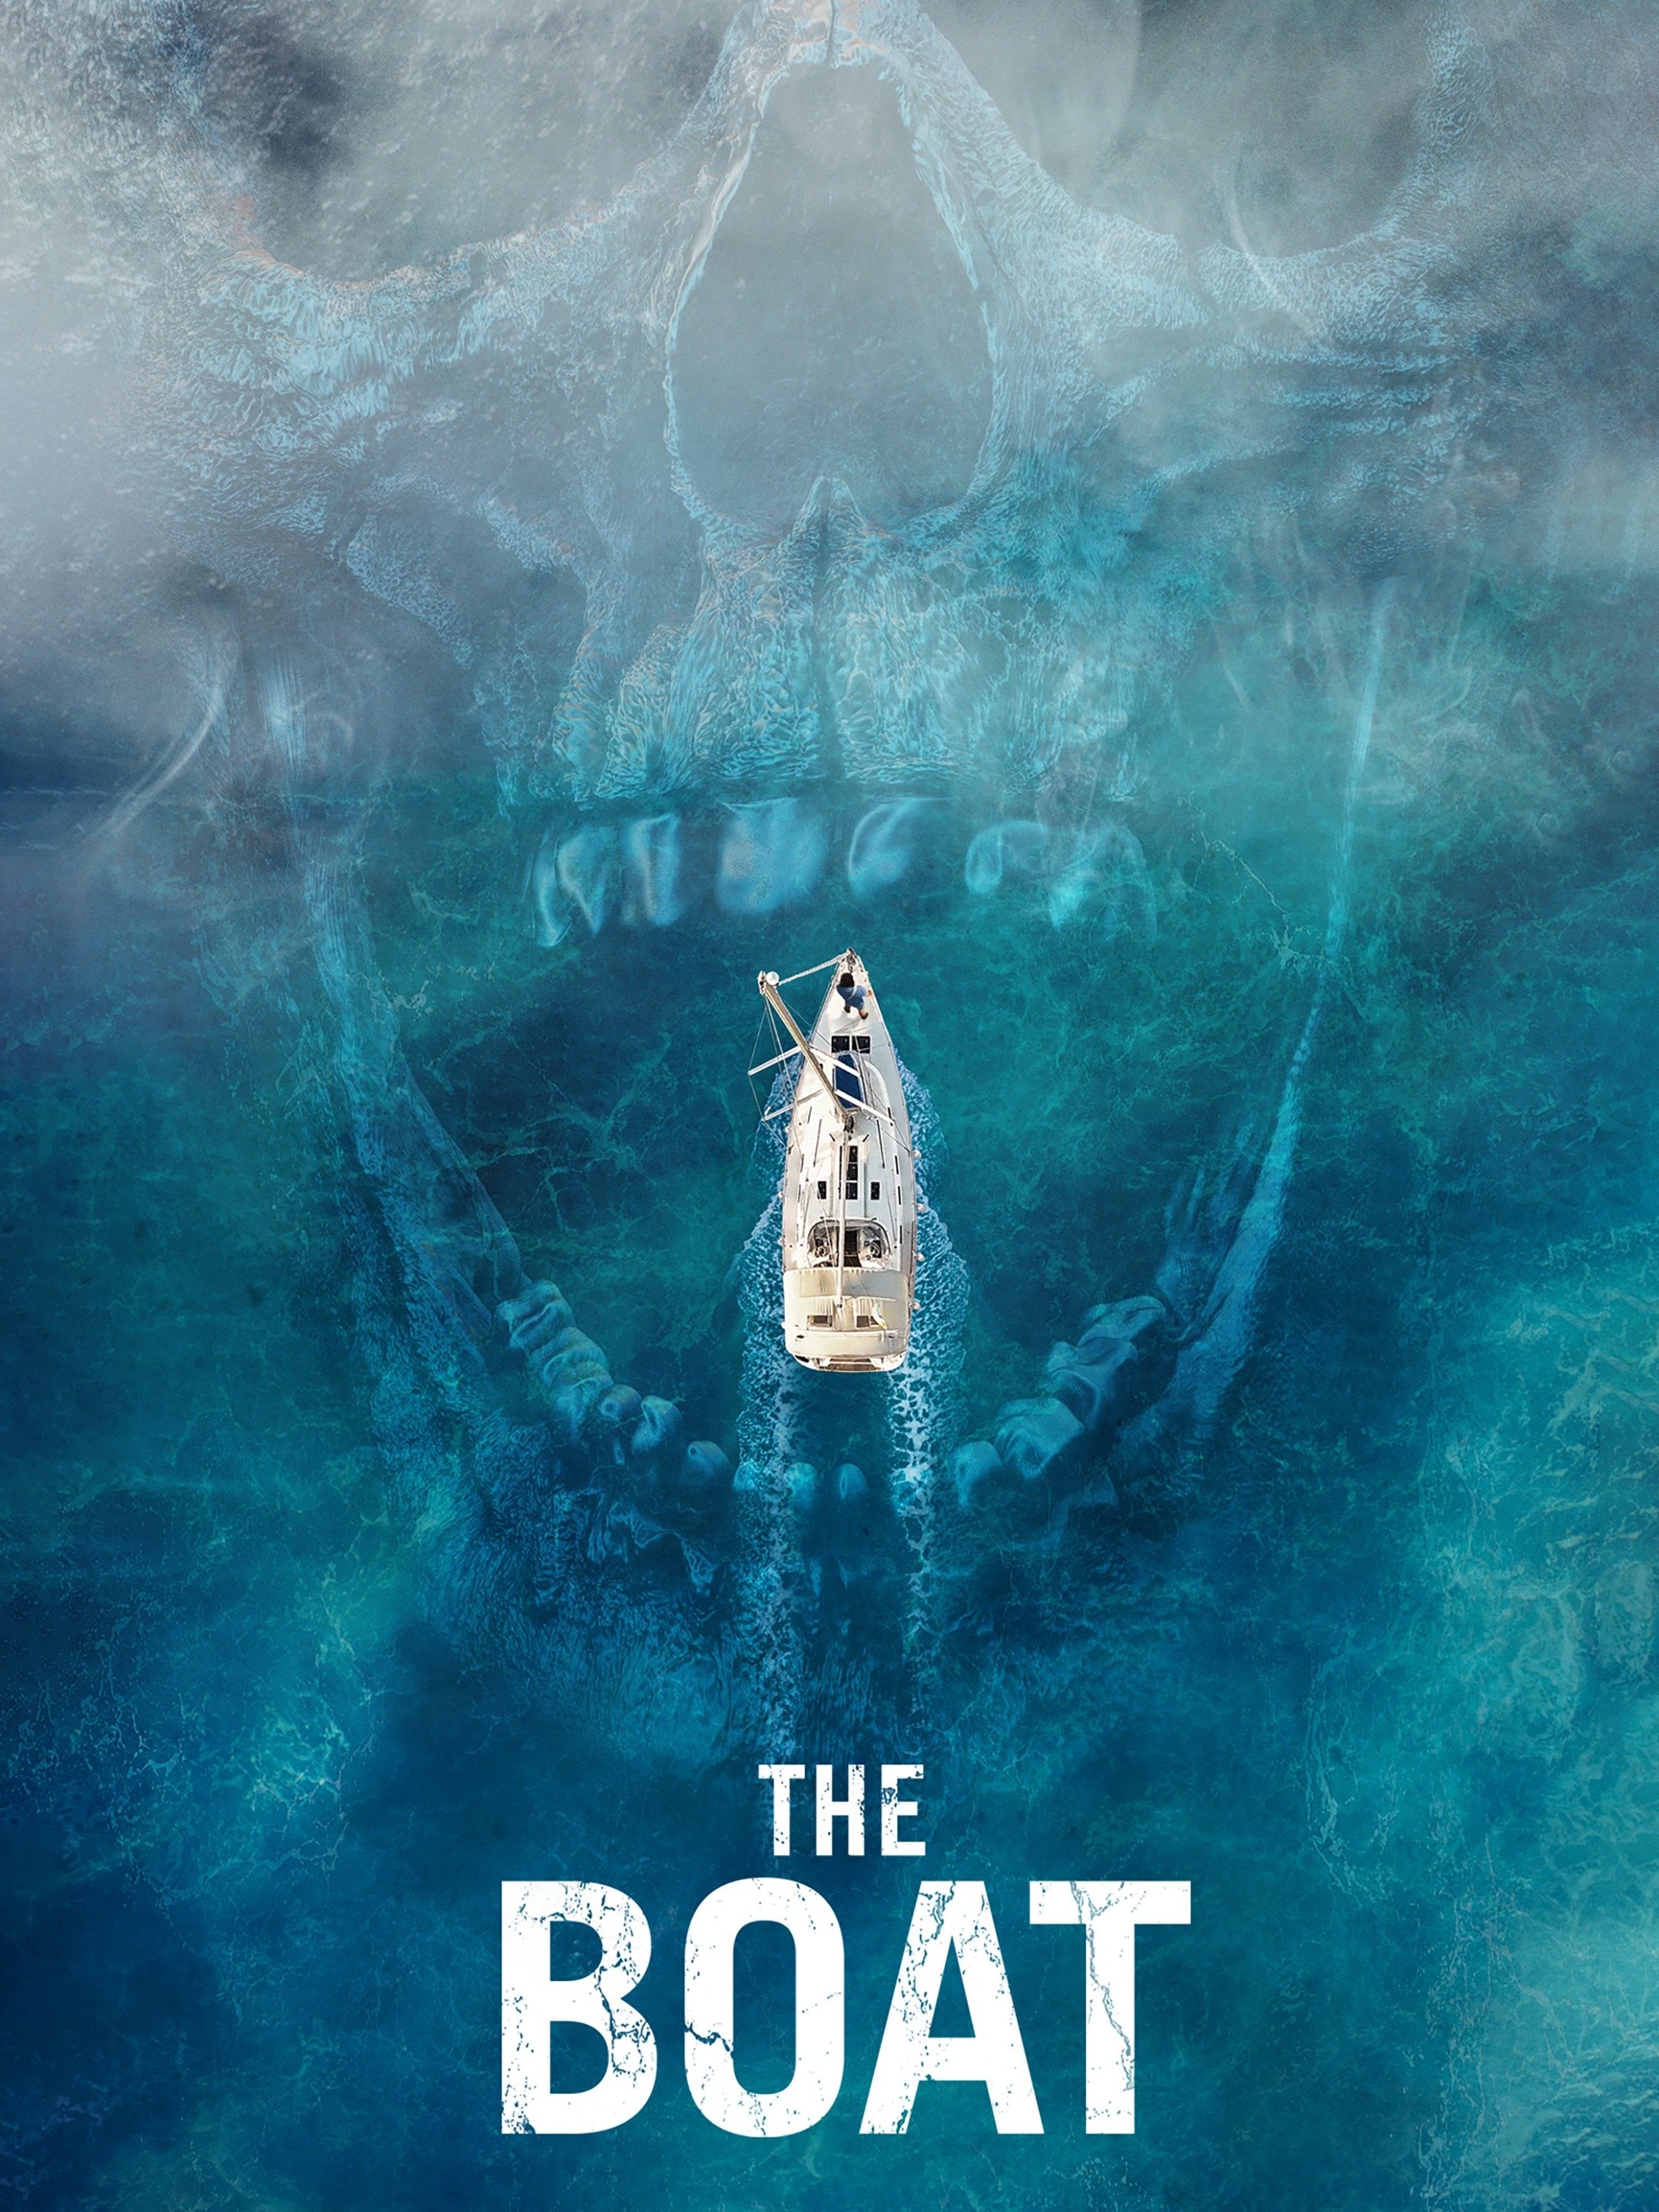 The Boat  Rotten Tomatoes